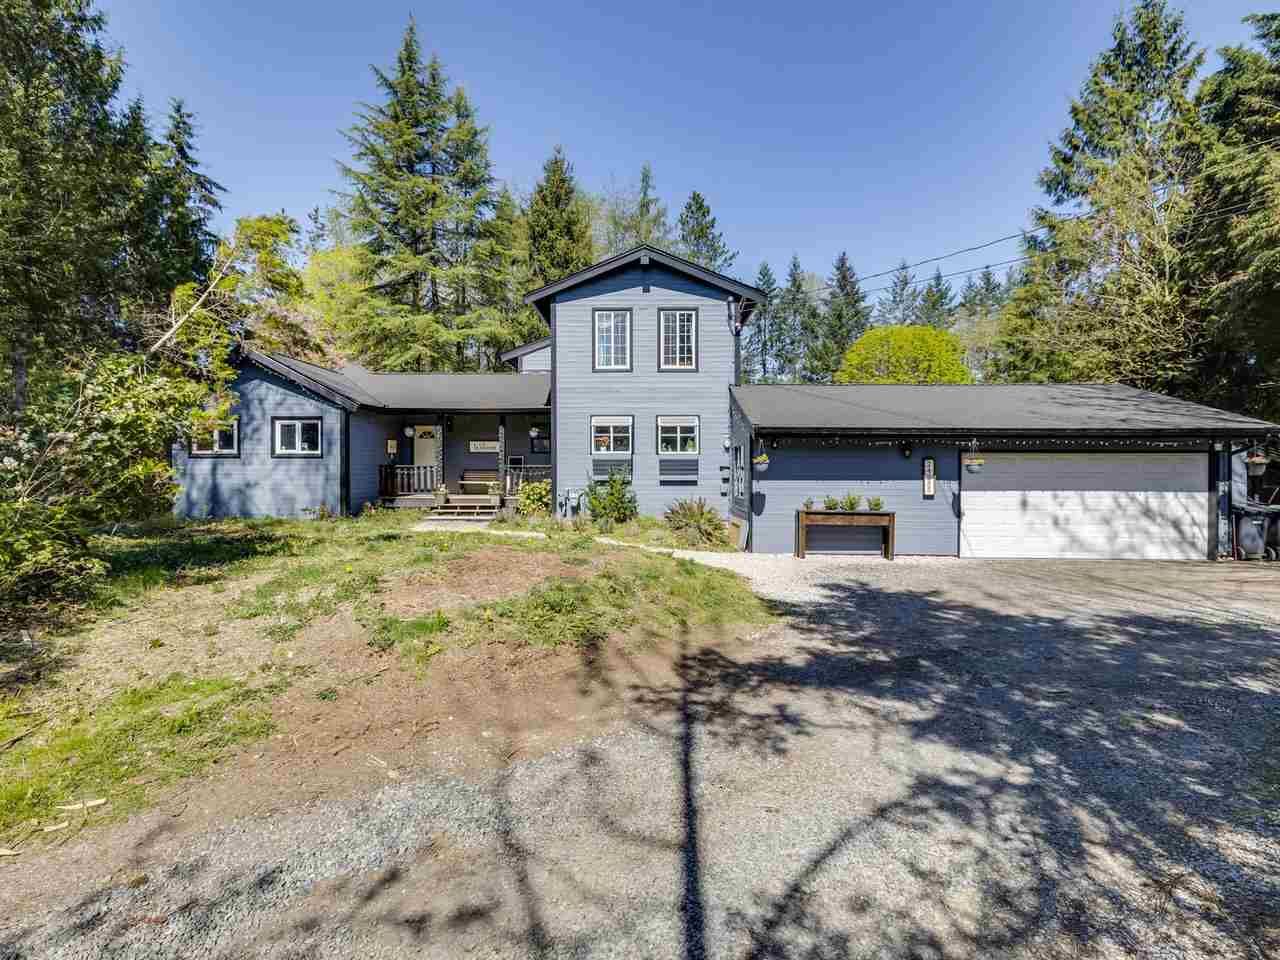 I have sold a property at 24255 54 AVE in Langley
